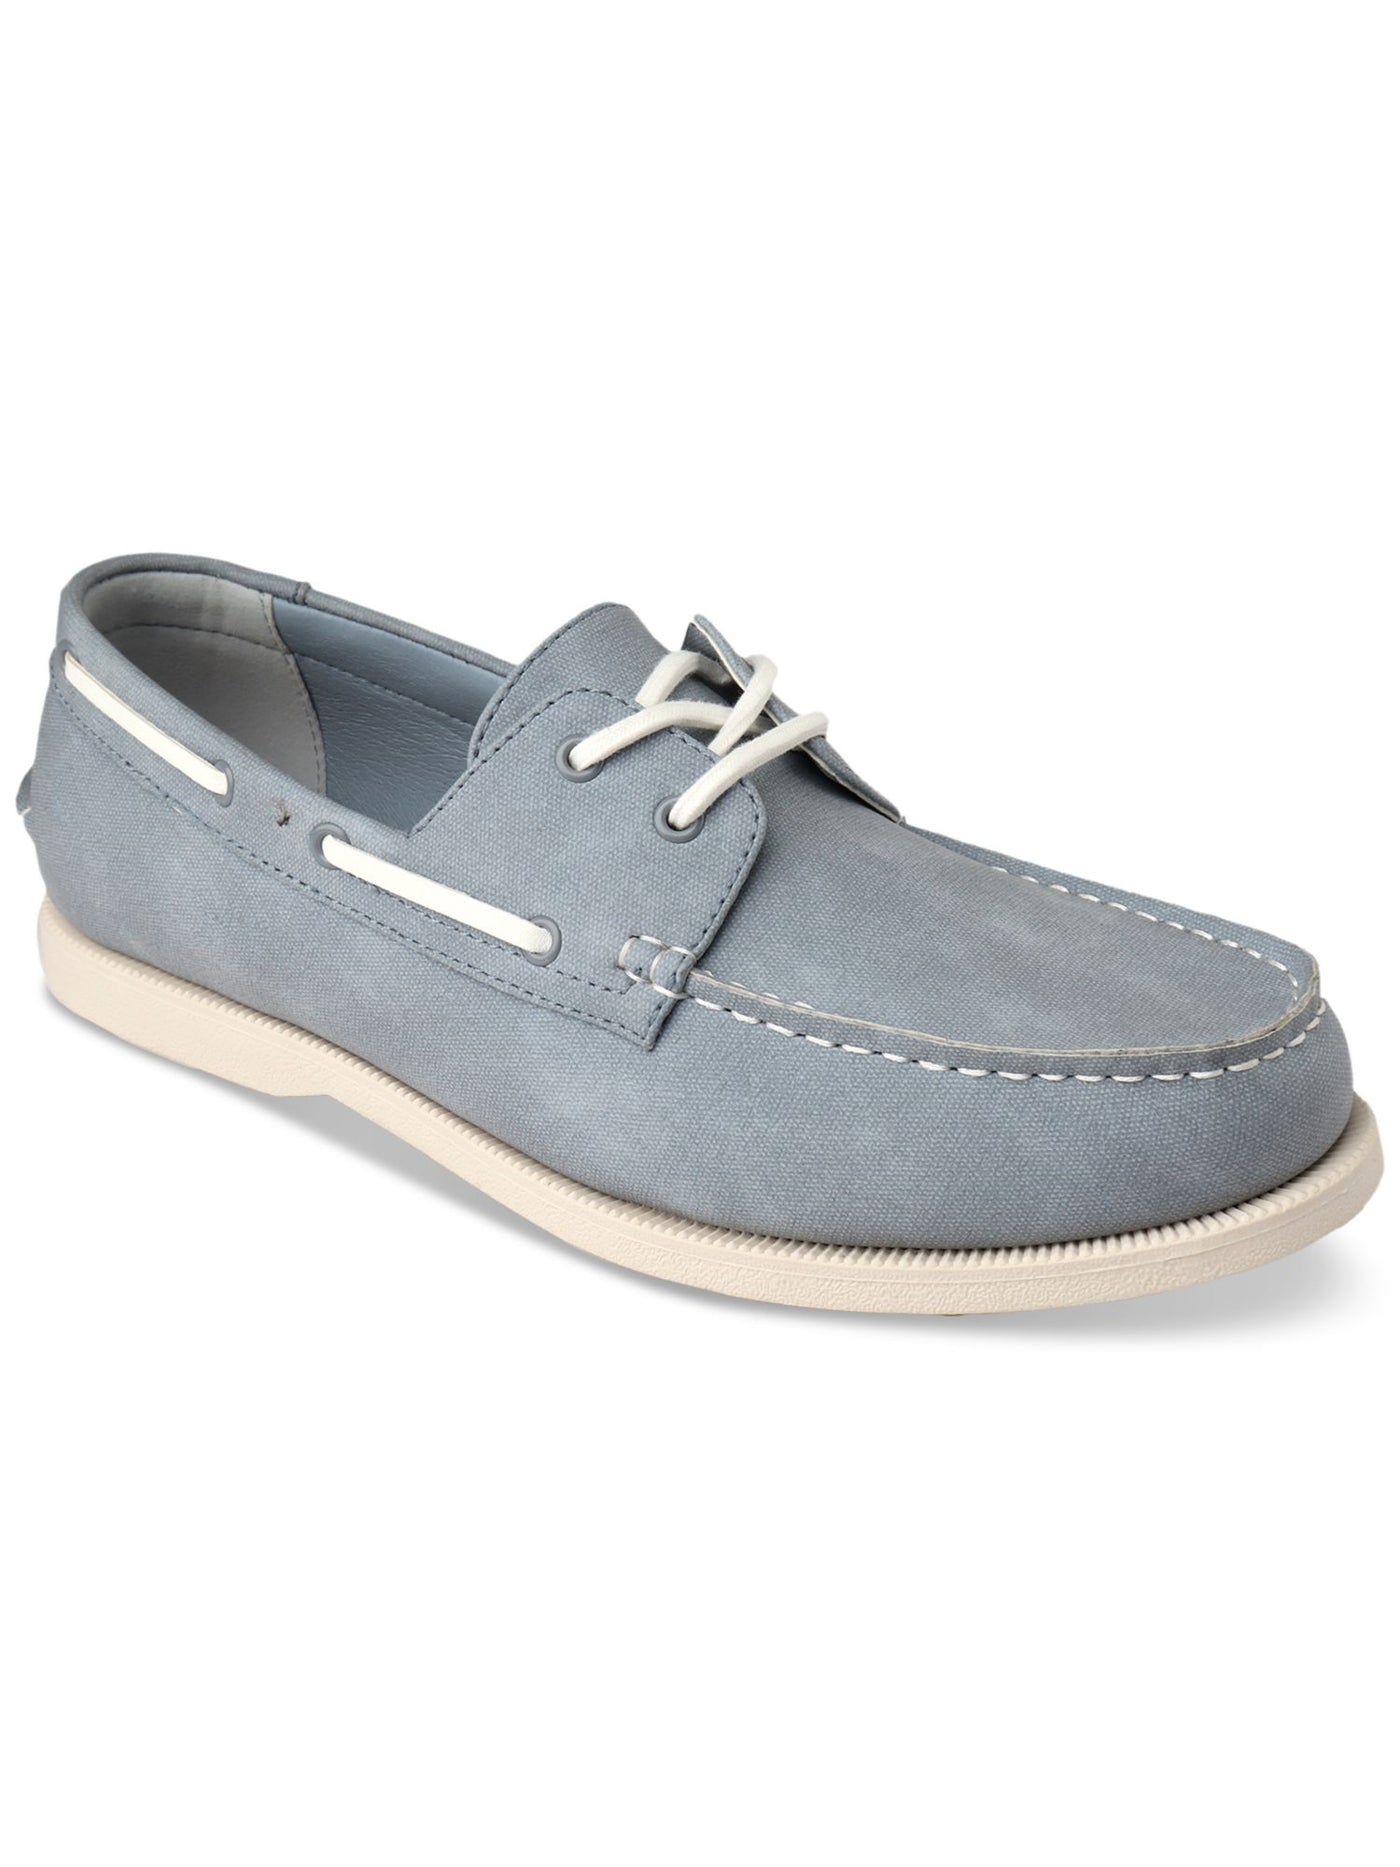 CLUBROOM Womens Light Blue Moc Toe Padded Elliot Round Toe Lace-Up Boat Shoes 12 M